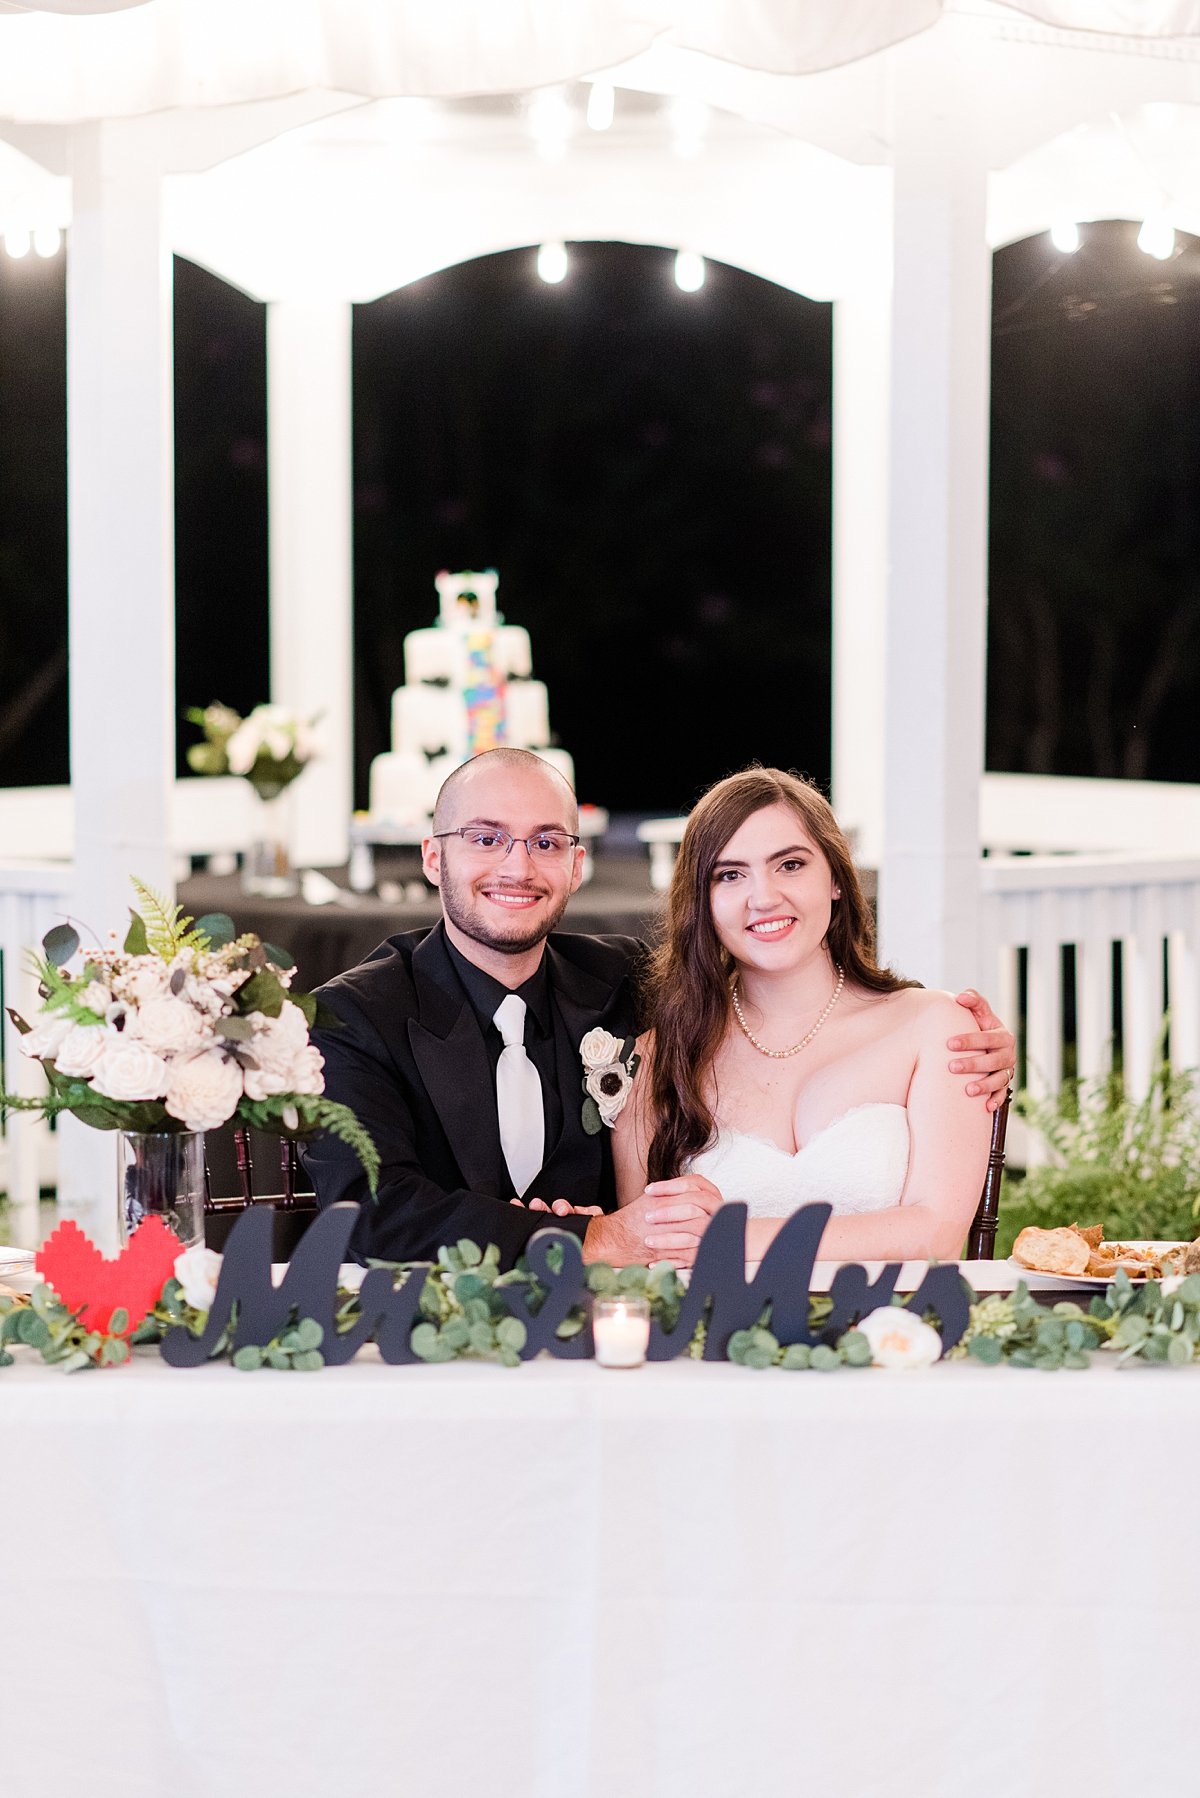 Bride and Groom Table at Virginia Cliffe Inn Summer Wedding Reception. Wedding Photography by Virginia Wedding Photographer Kailey Brianne Photography. 